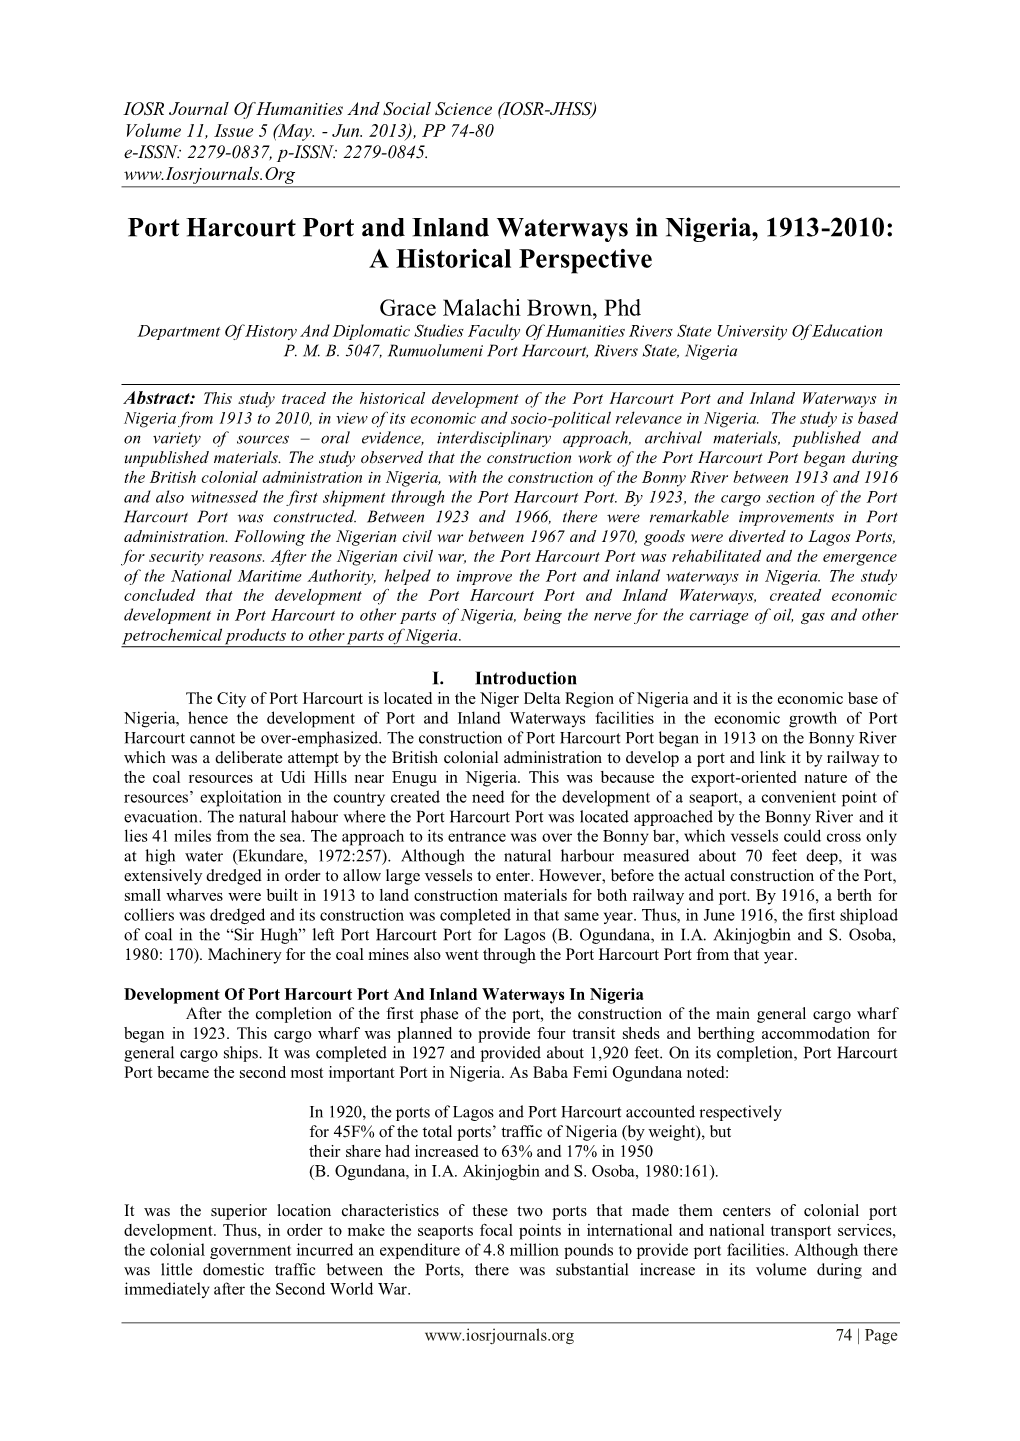 Port Harcourt Port and Inland Waterways in Nigeria, 1913-2003: a Historical Perspective